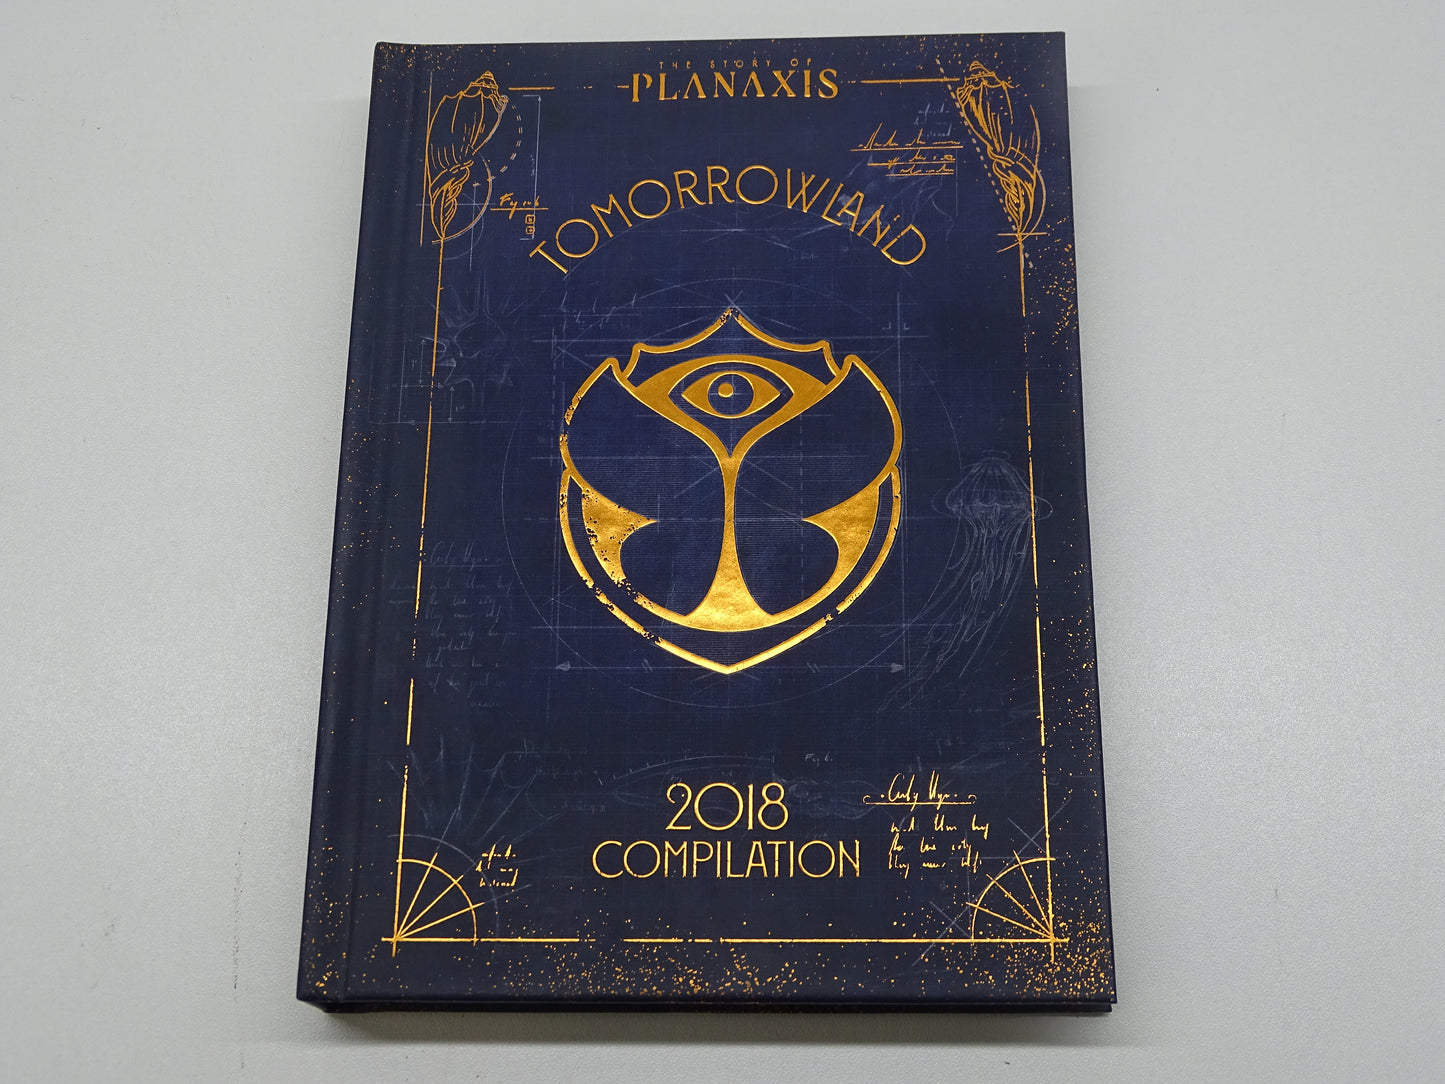 3 x CD, Tomorrowland: The Story Of Planaxis, 2018